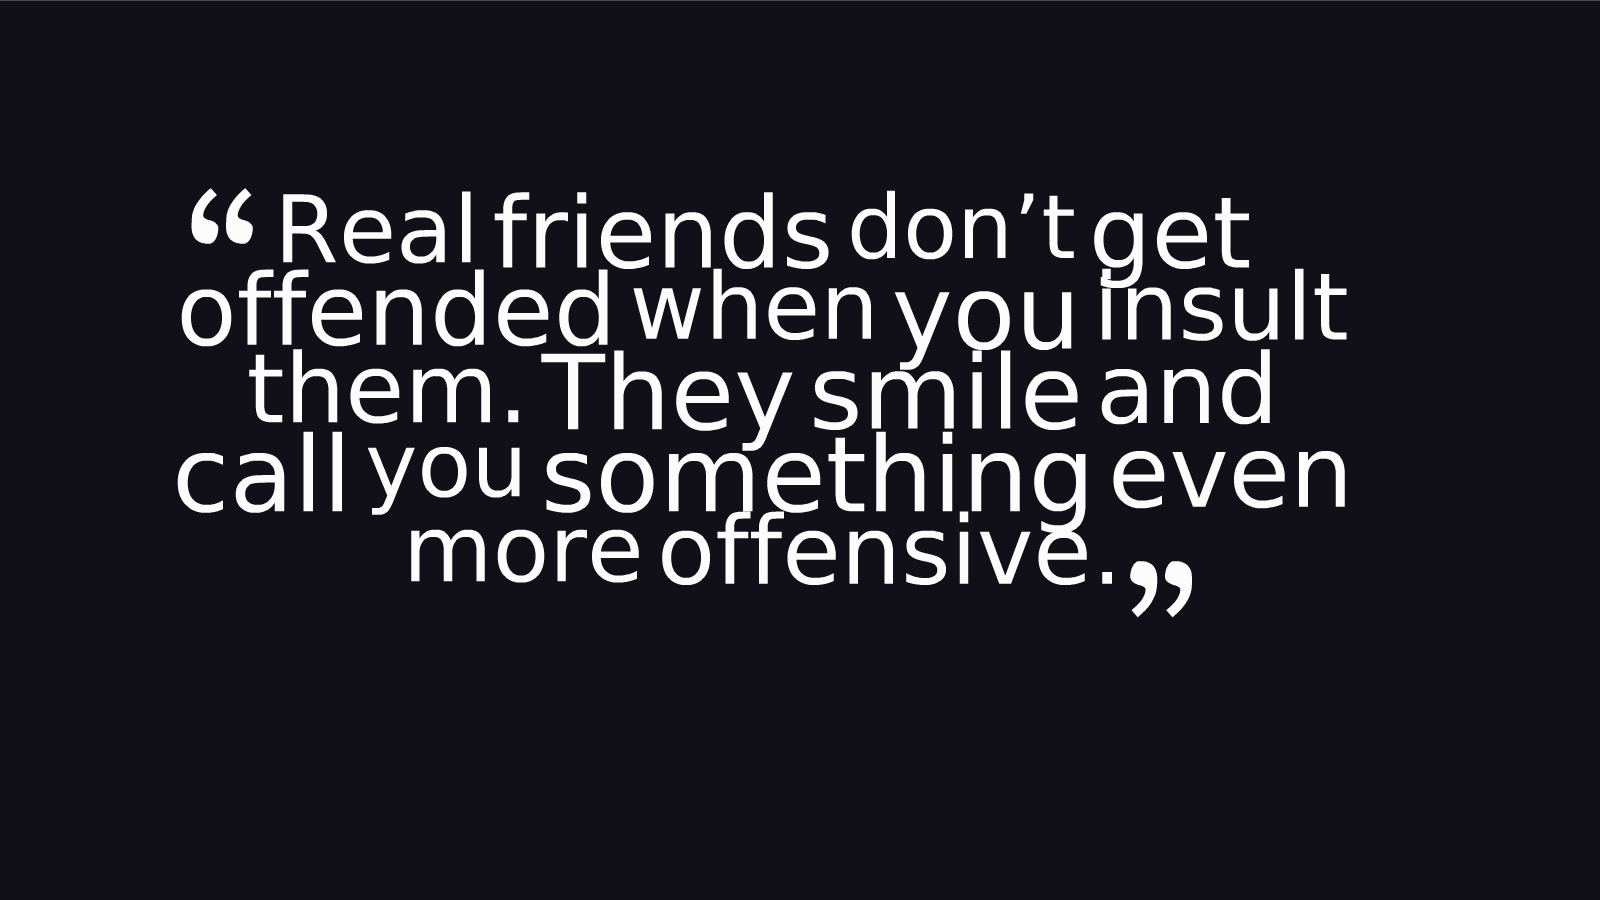 Maintain That Friendship!. Friendship quotes image, Friendship day quotes, Real friendship quotes